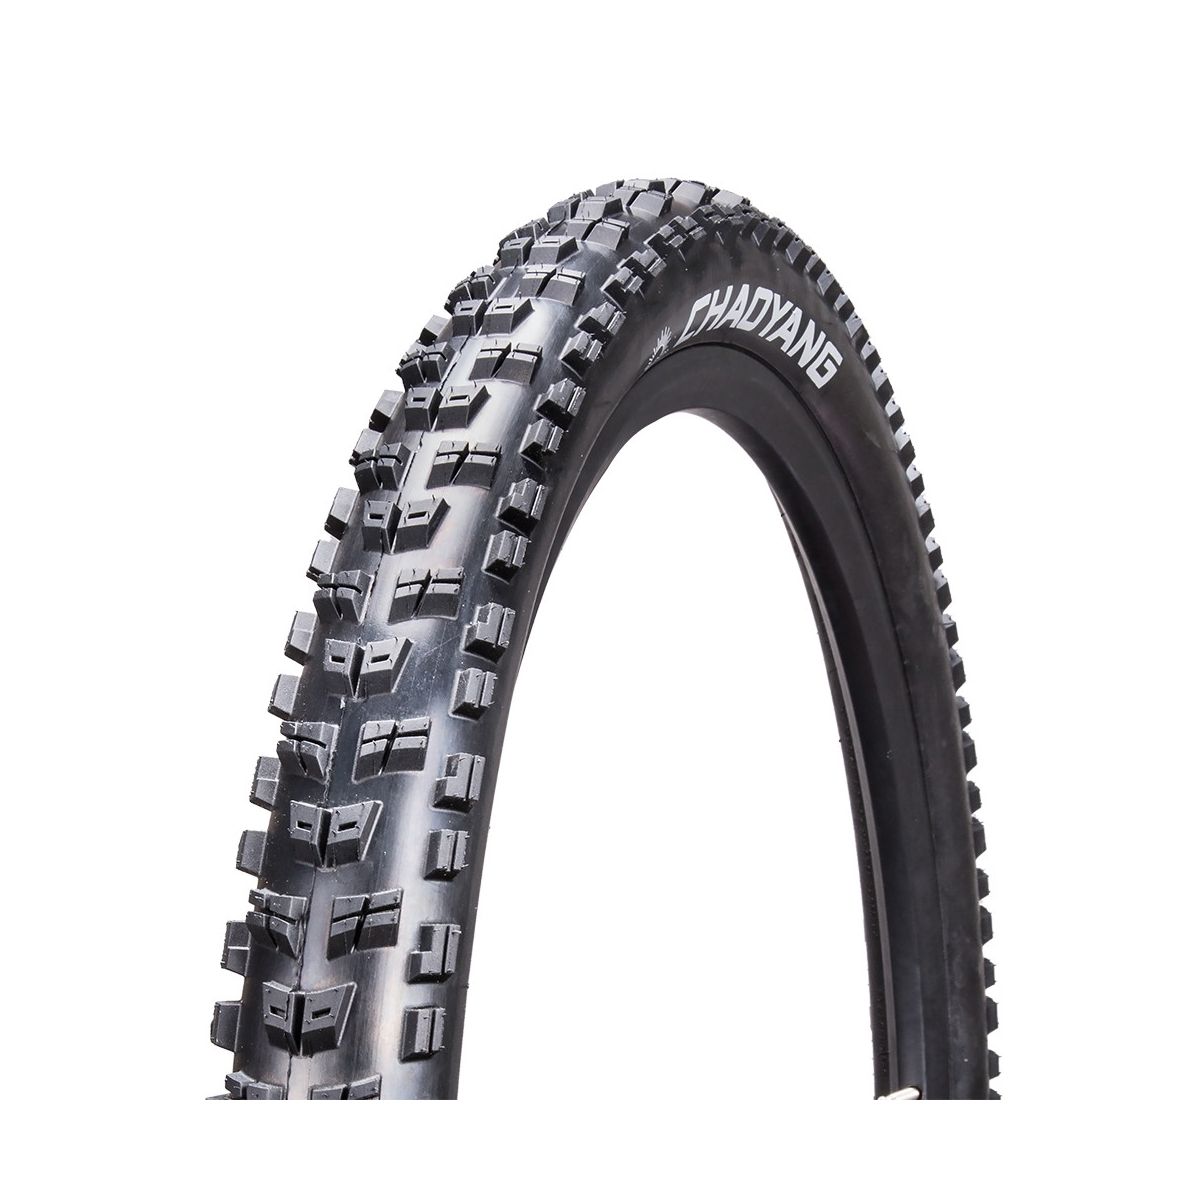 Cubiertas Chaoyang Rock Wolf 27.5x2.60 3C Tubeless 60TPI